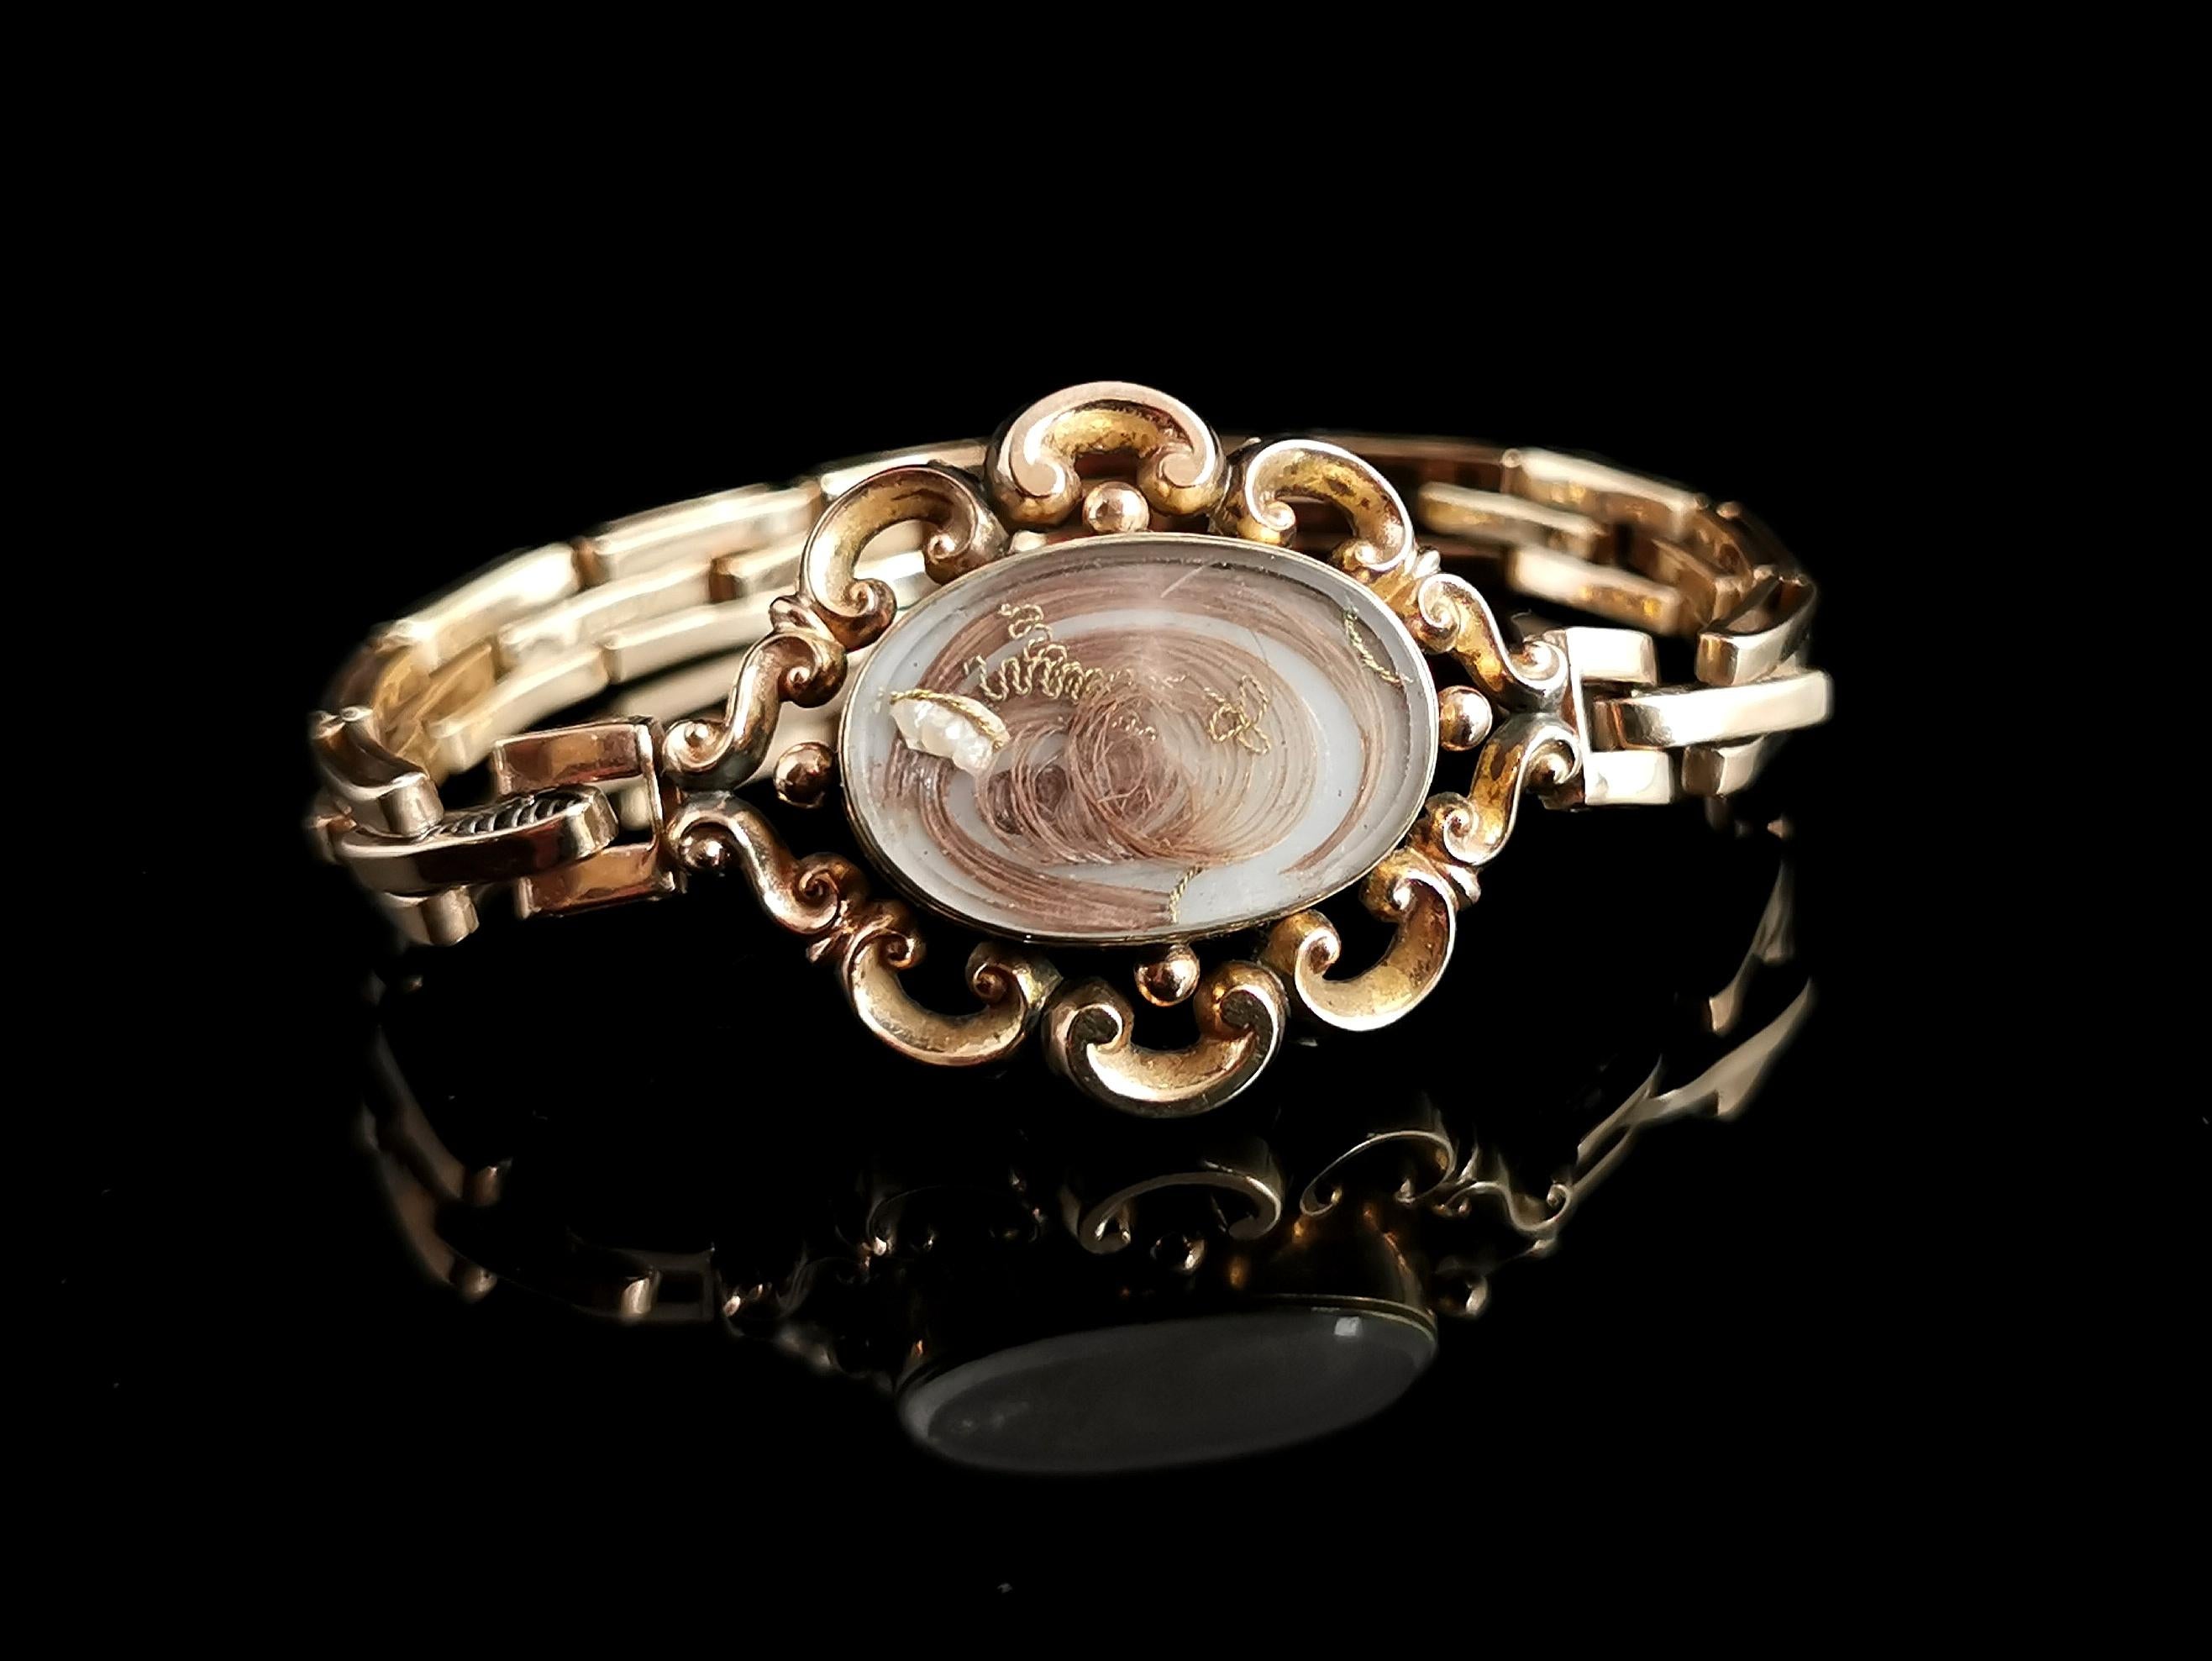 A beautiful antique gold mourning bracelet.

This bracelet features an early Victorian central mourning panel in scrolling 9c karat yellow gold with glazed compartments on both sides, each side has a fine hairwork spray secured with gold thread and